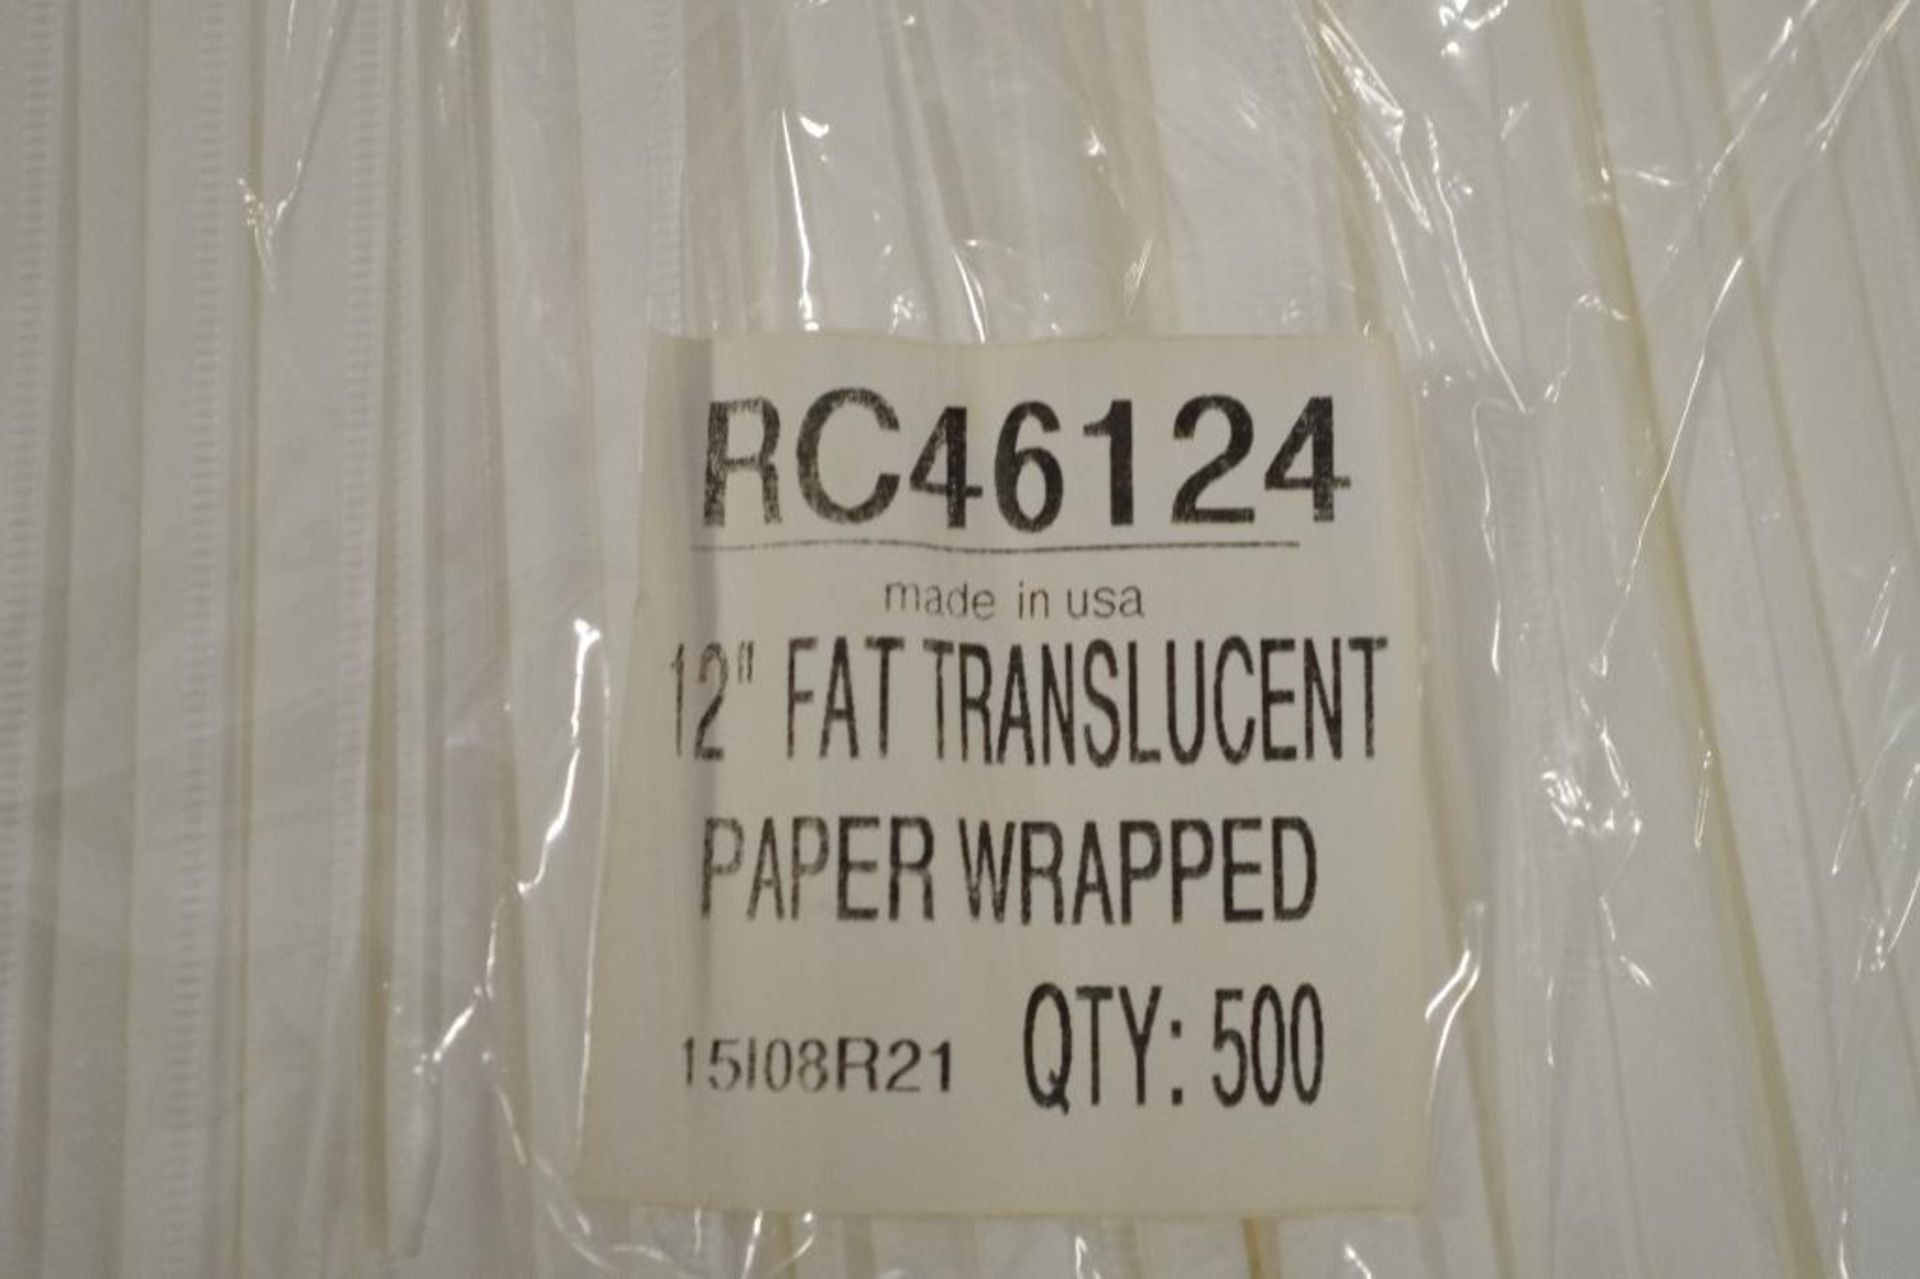 [8000] 12" Fat Translucent Straws (16 Packs of 500) Made in USA - Image 3 of 4